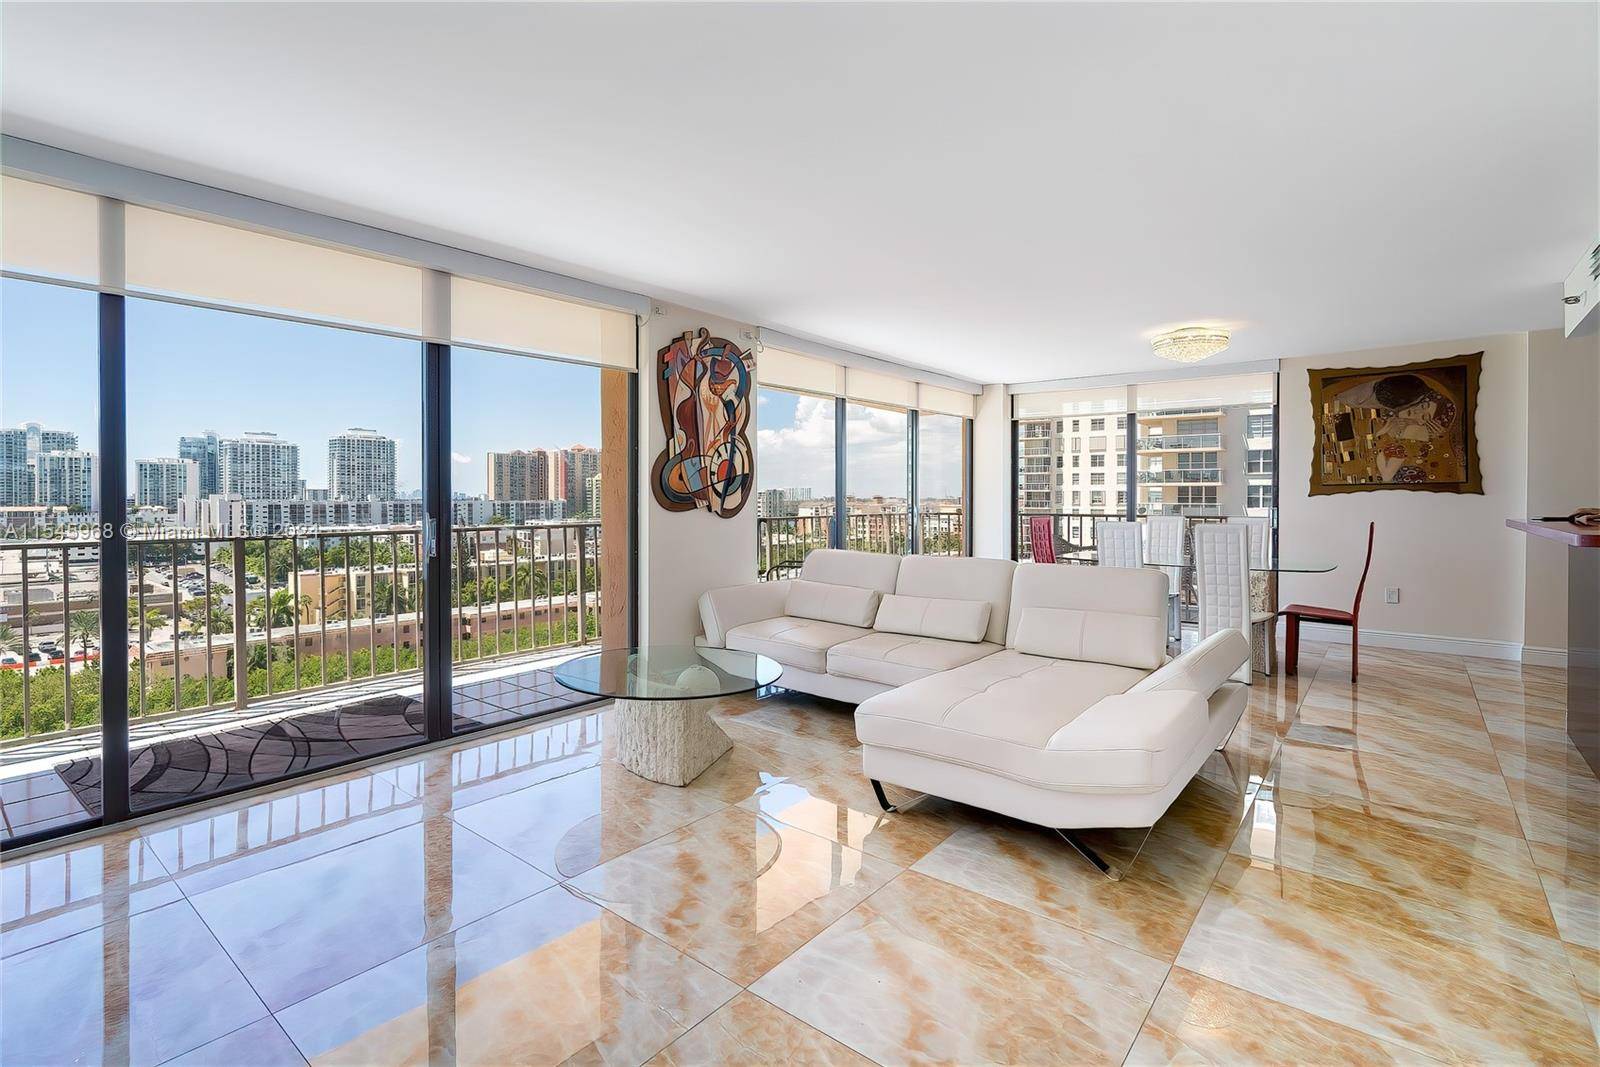 This stunning three bedroom, three bathroom apartment is in the highly sought after Sunny Isles Beach area.